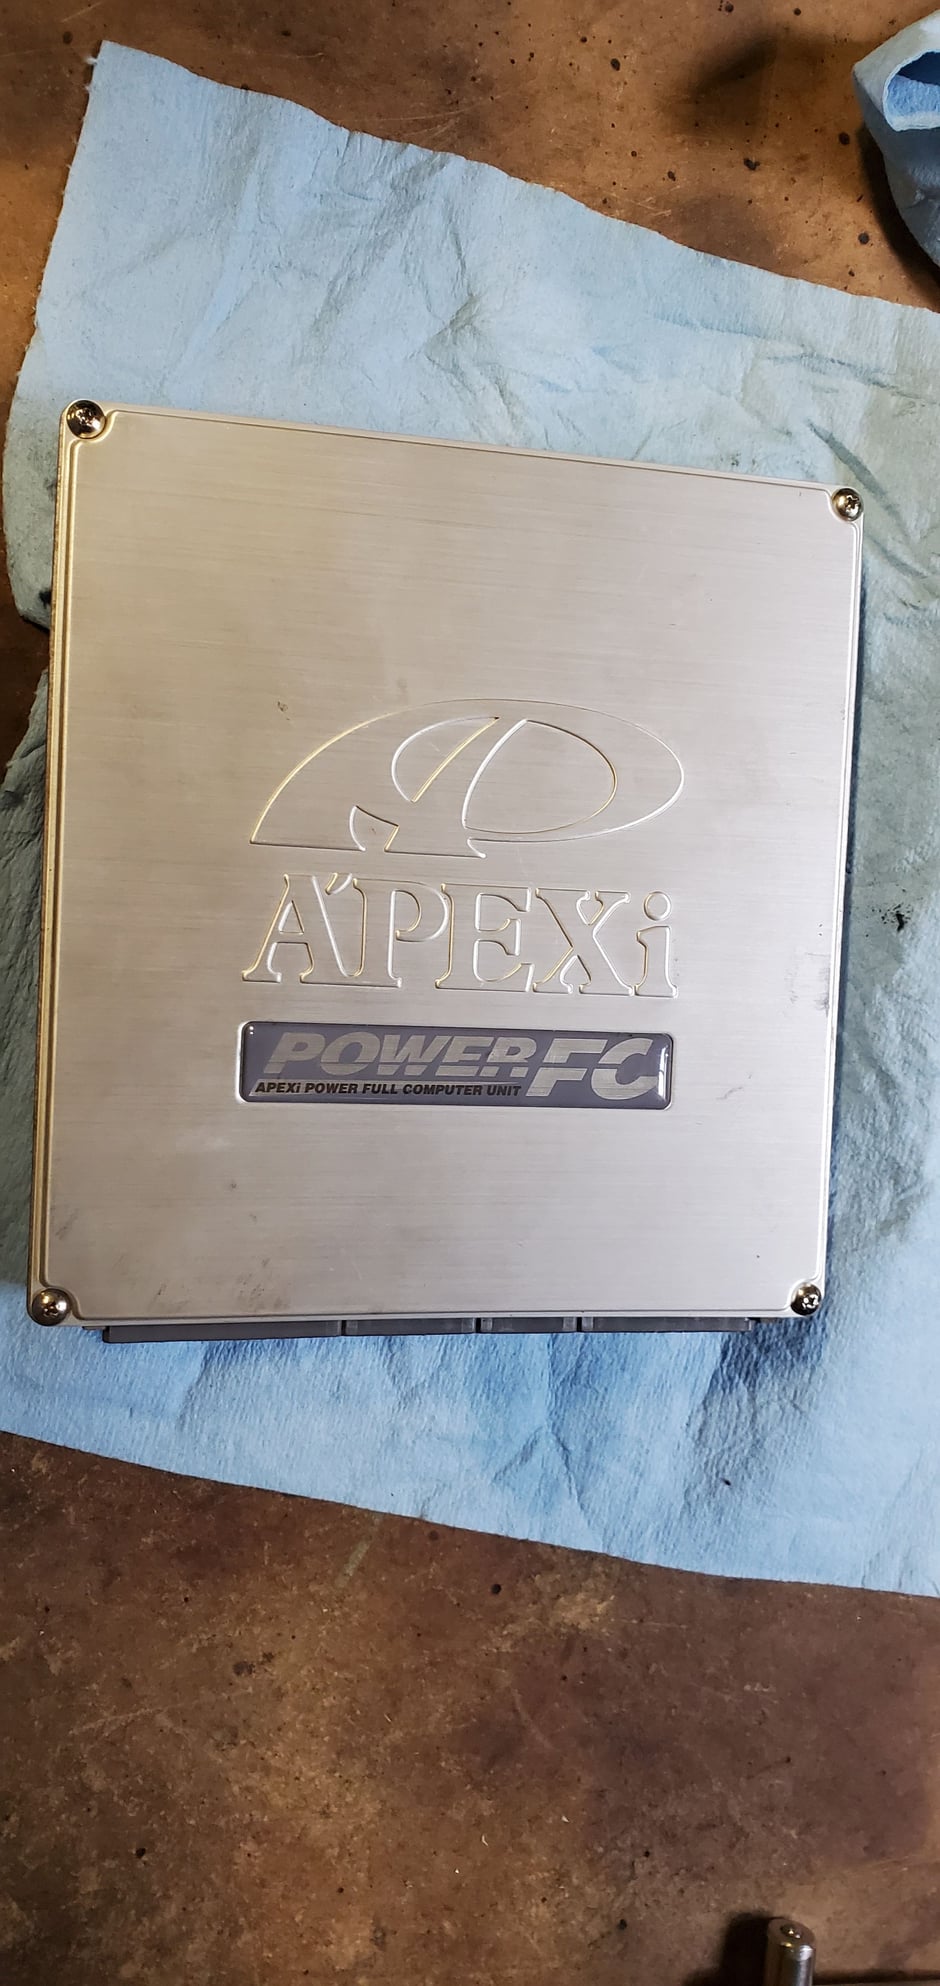 Engine - Electrical - Apexi PowerFC - Used - 1992 to 1995 Mazda RX-7 - Defuniak Springs, FL 32433, United States